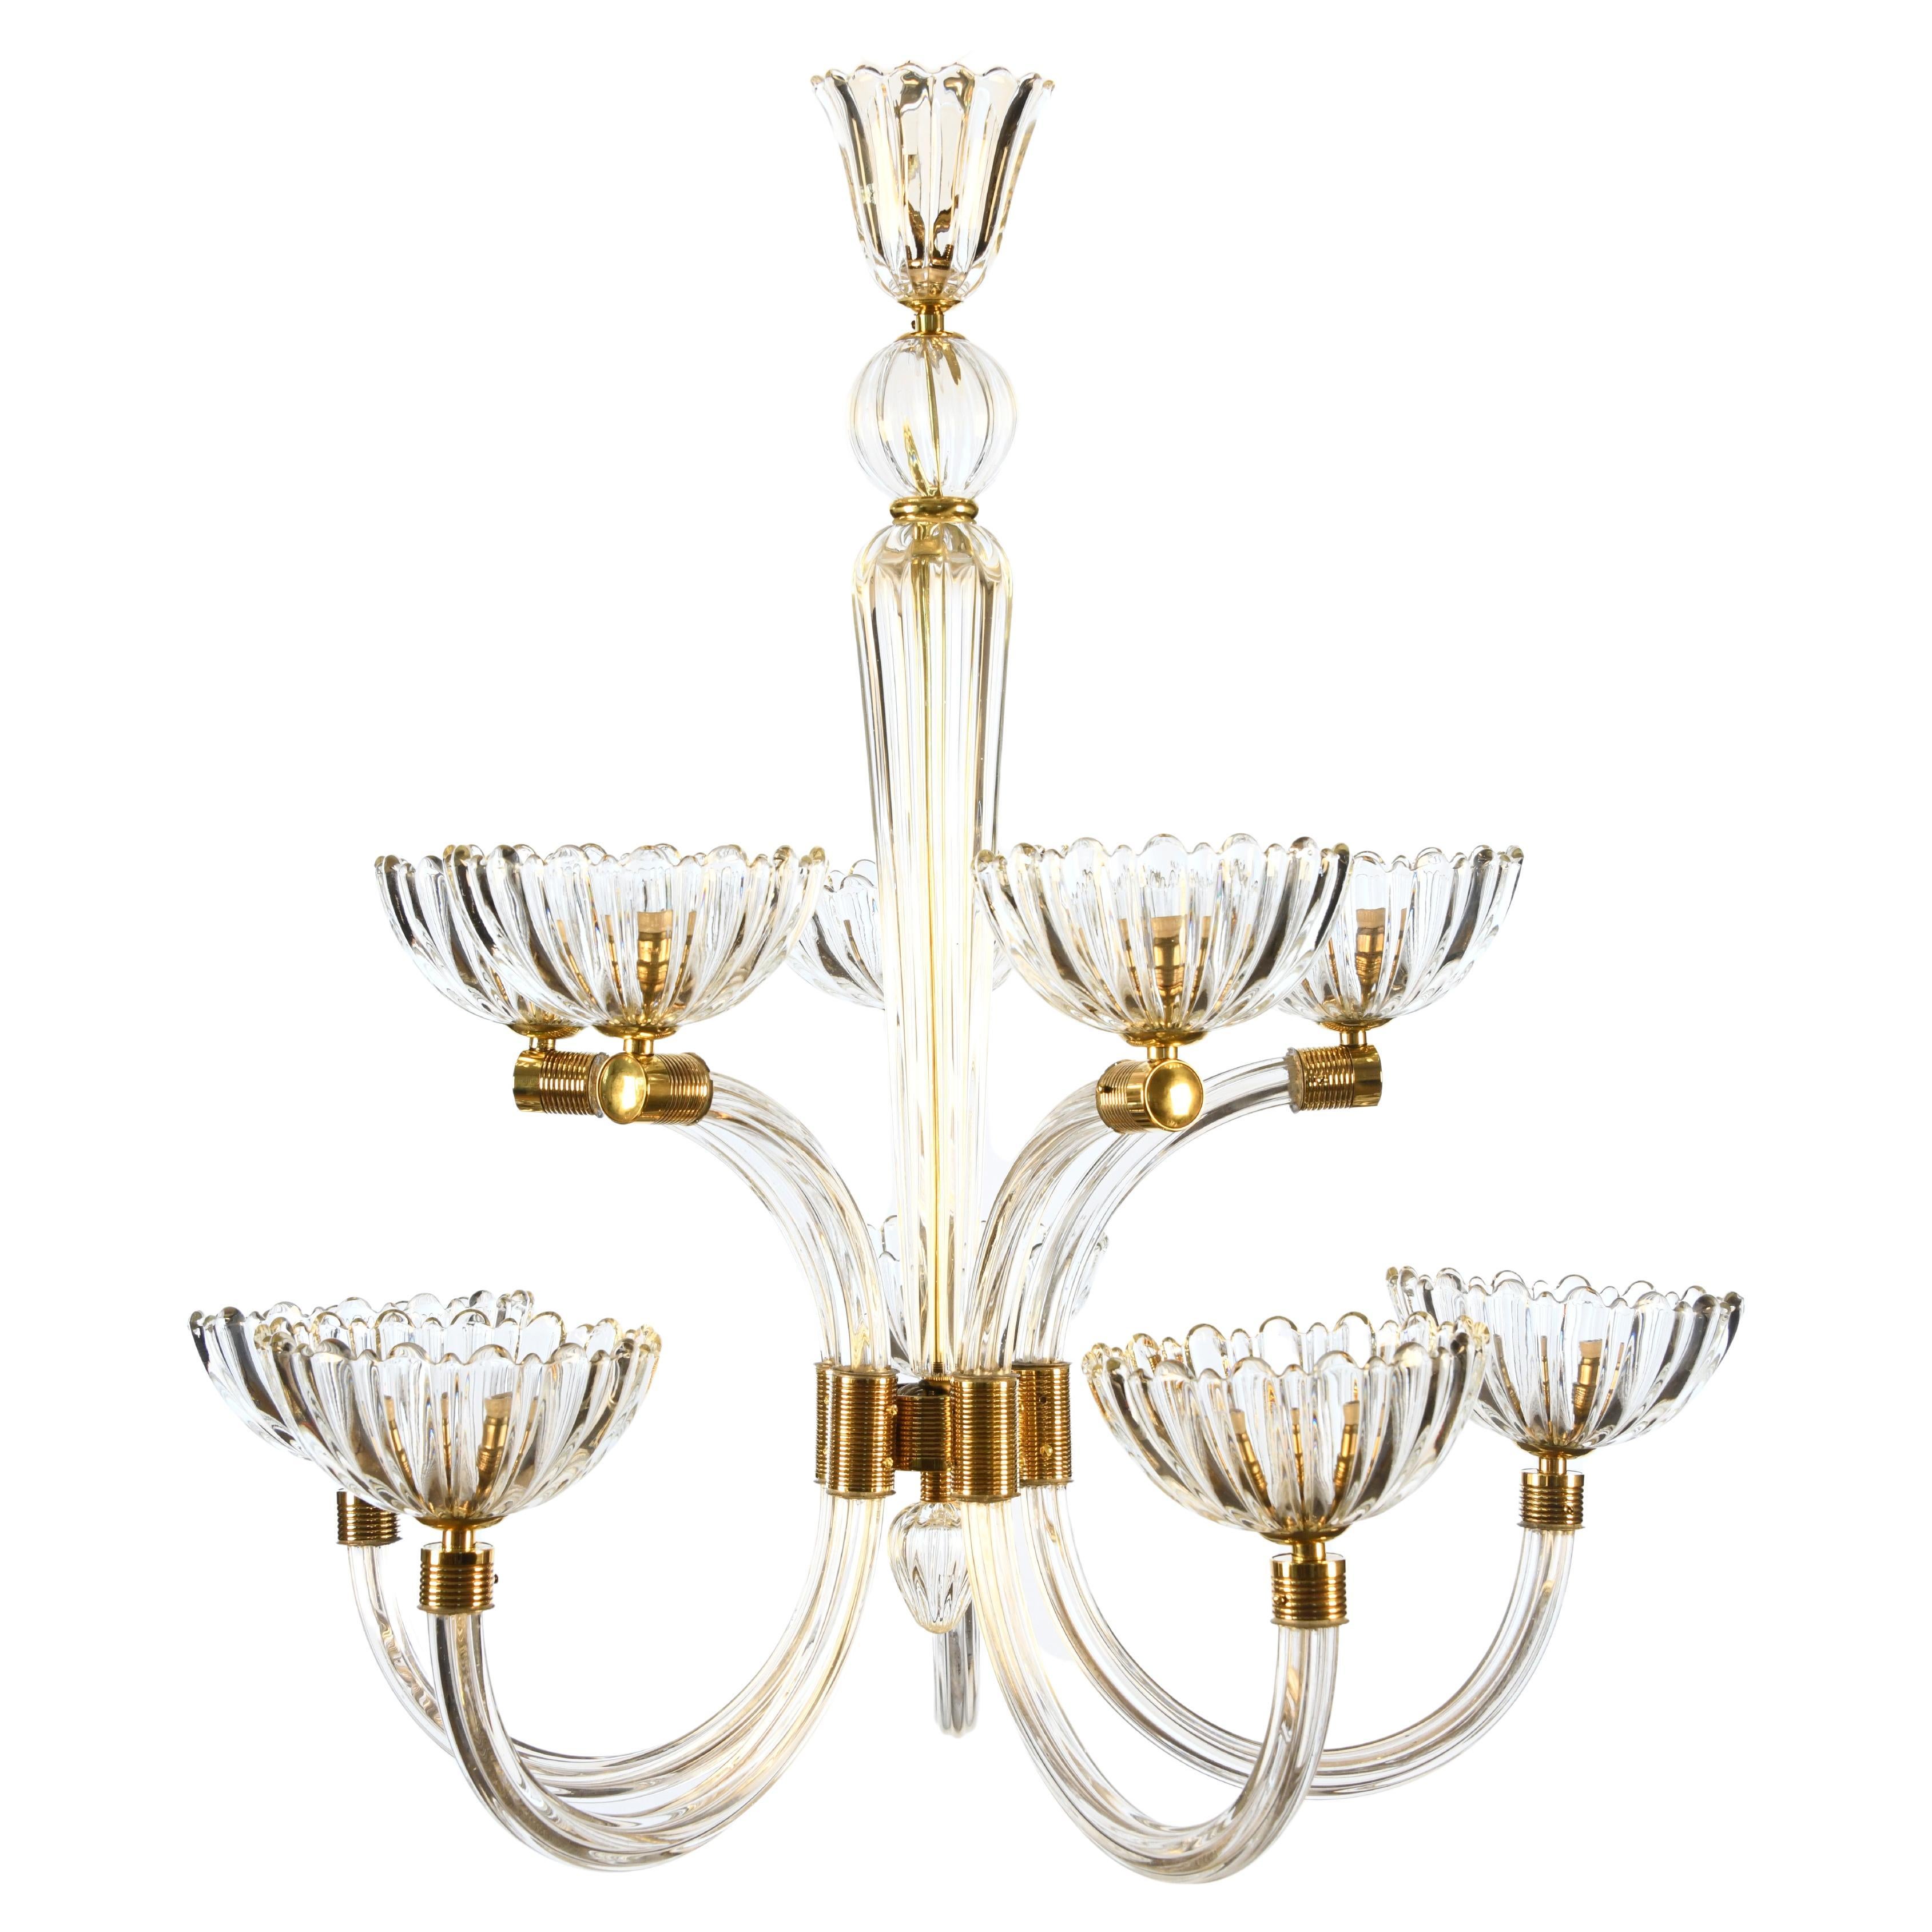 Mid-20th Century Chandelier by Ercole Barovier, 10 Lights, Murano, 1940 For Sale